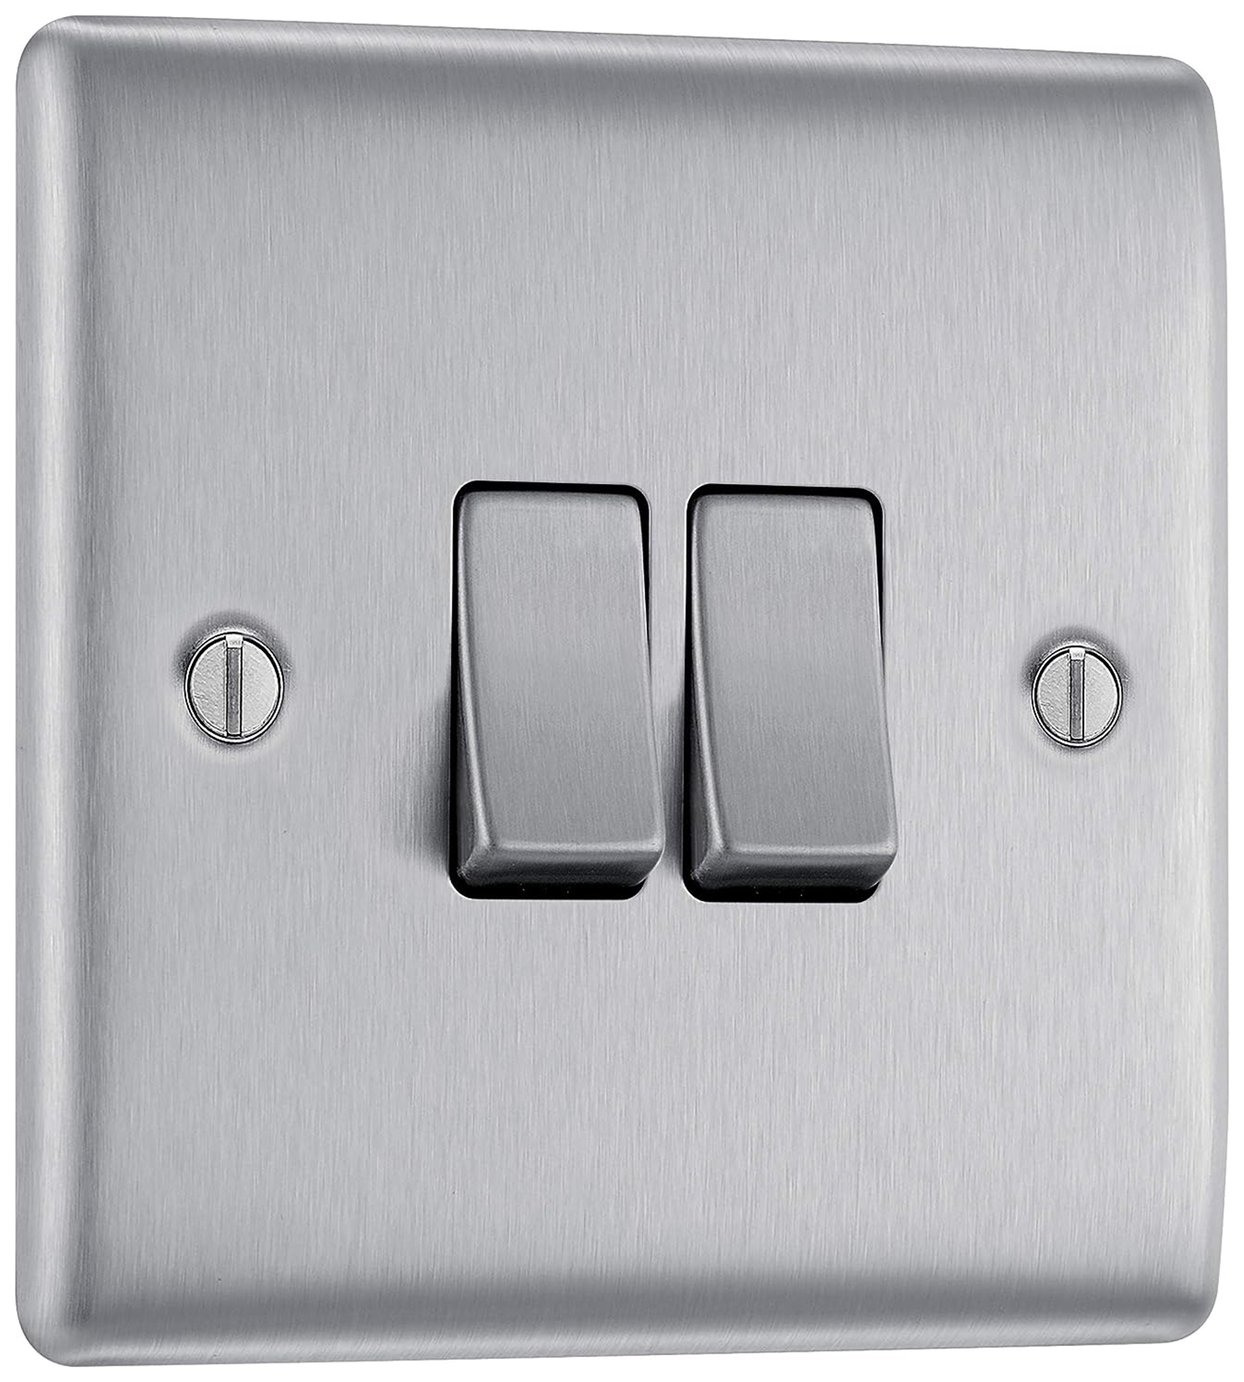 BG 2 Gang 2 Way Switch Brushed - Stainless Steel